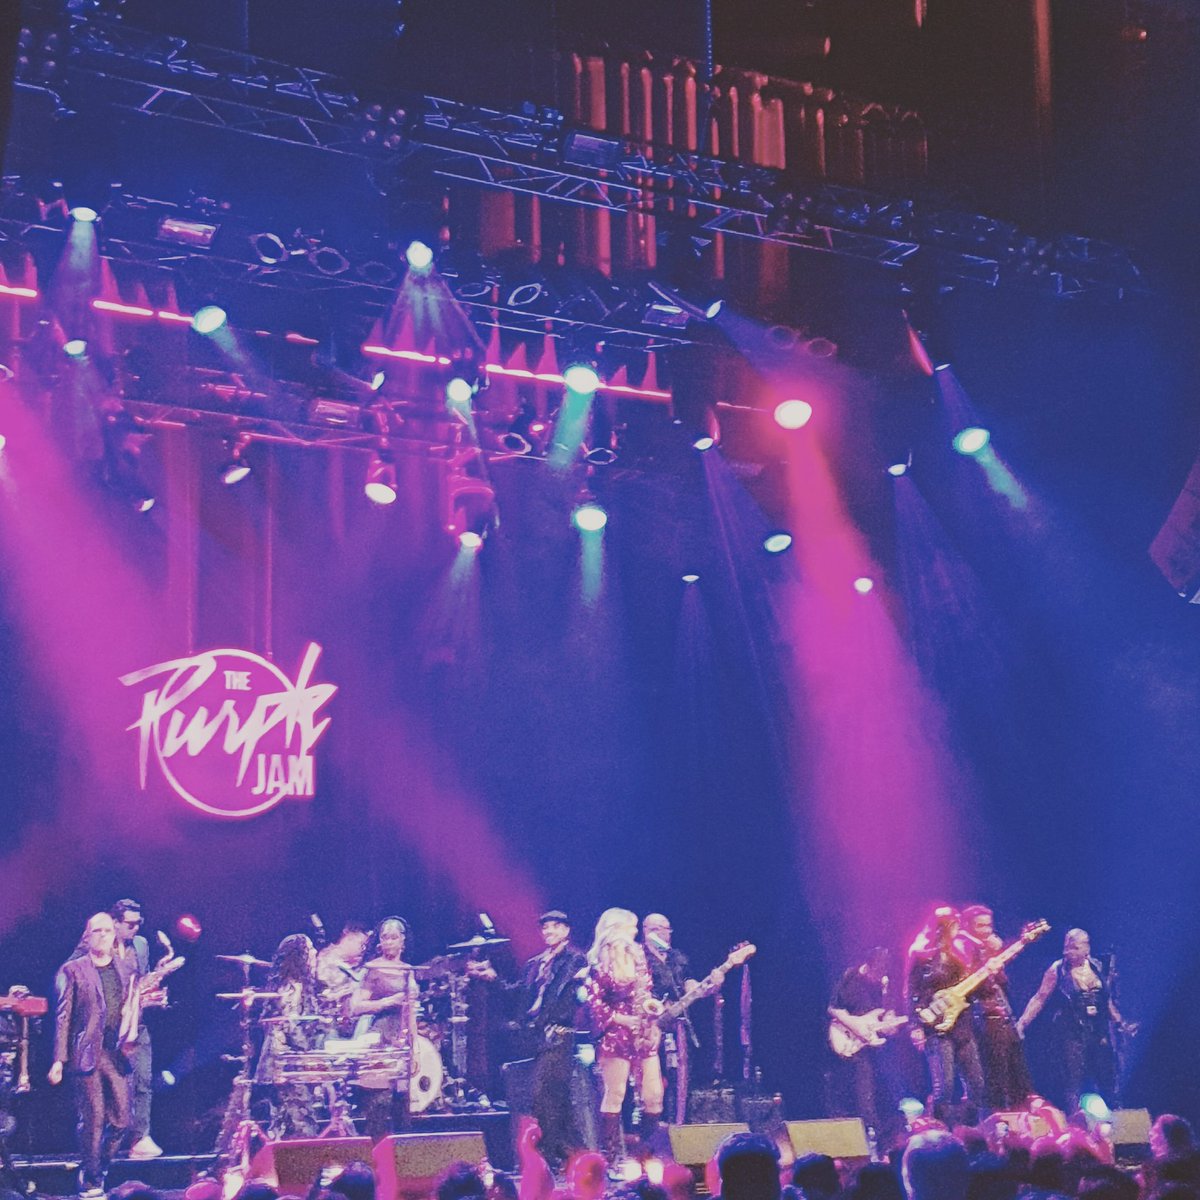 Purple Jam with Prince collaborators Shelby J. Sheila E., Ida Nielsen, Philip Lassiter and the mighty Candy Dulfer and her fantastic band 💜 #purplejam #prince #shelbyj #sheilae #idanielsen #philiplassiter #candydulfer #livemusic #tivolivredenburg #utrecht